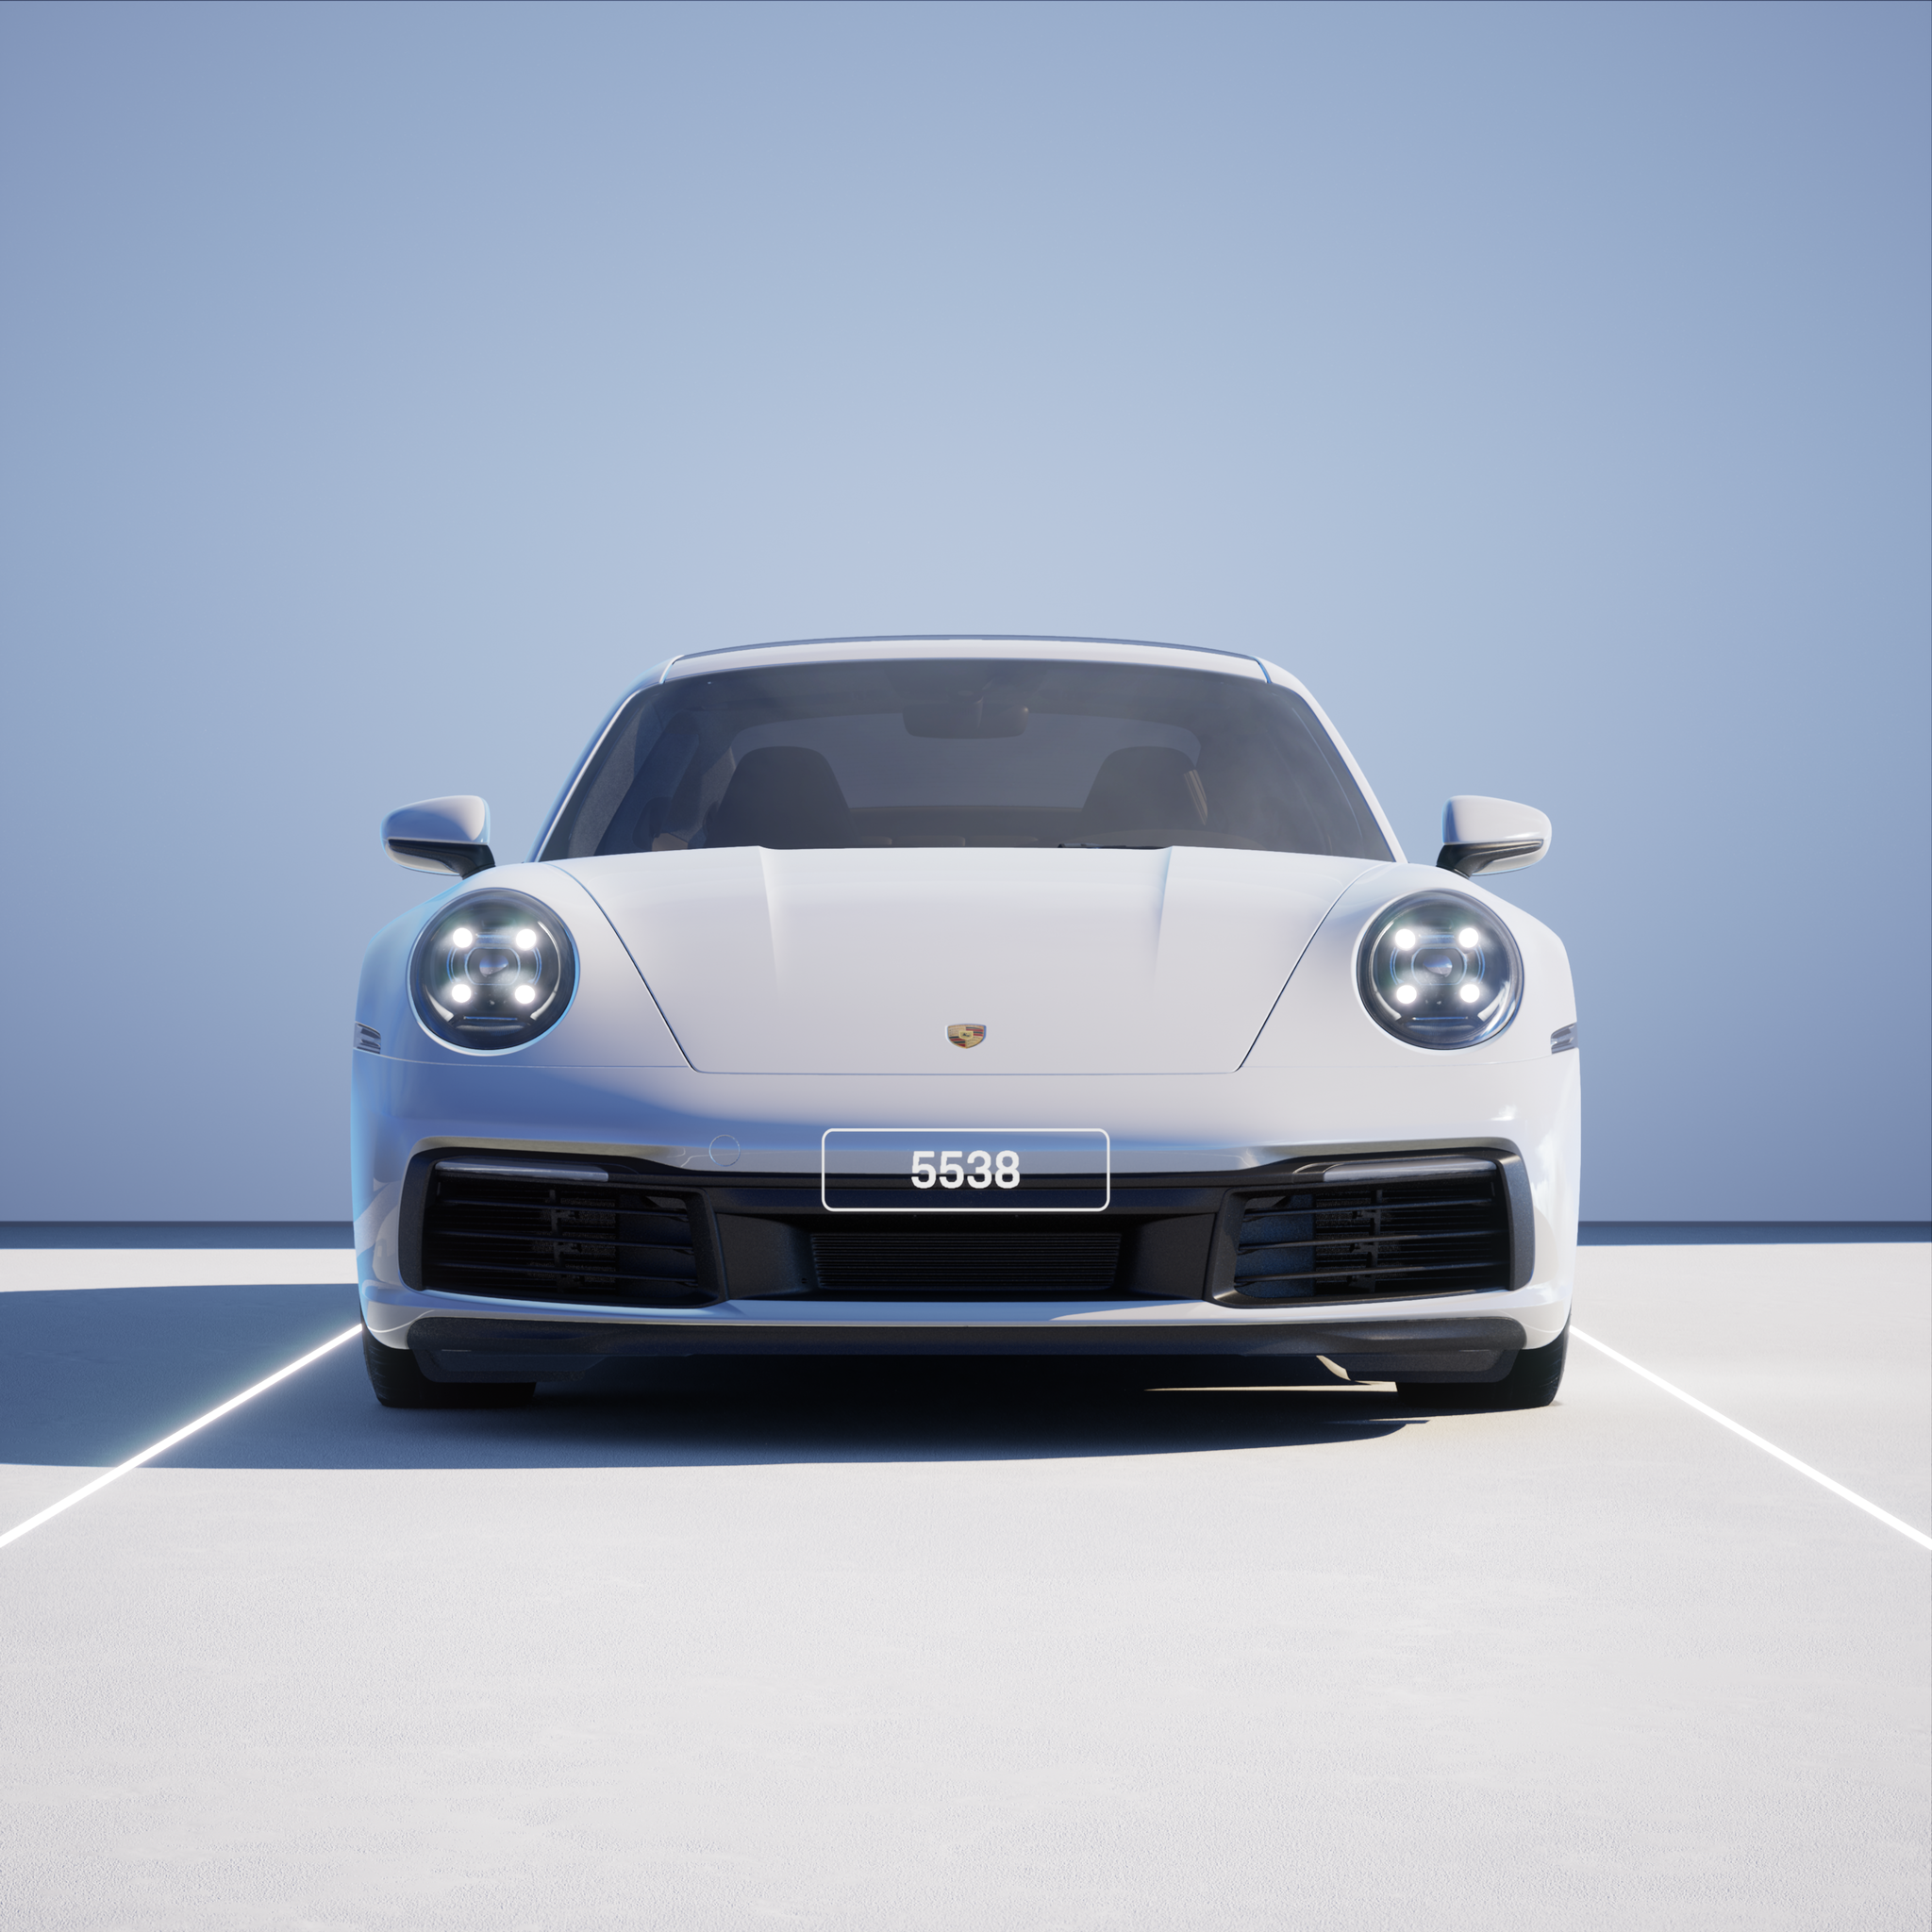 The PORSCHΞ 911 5538 image in phase